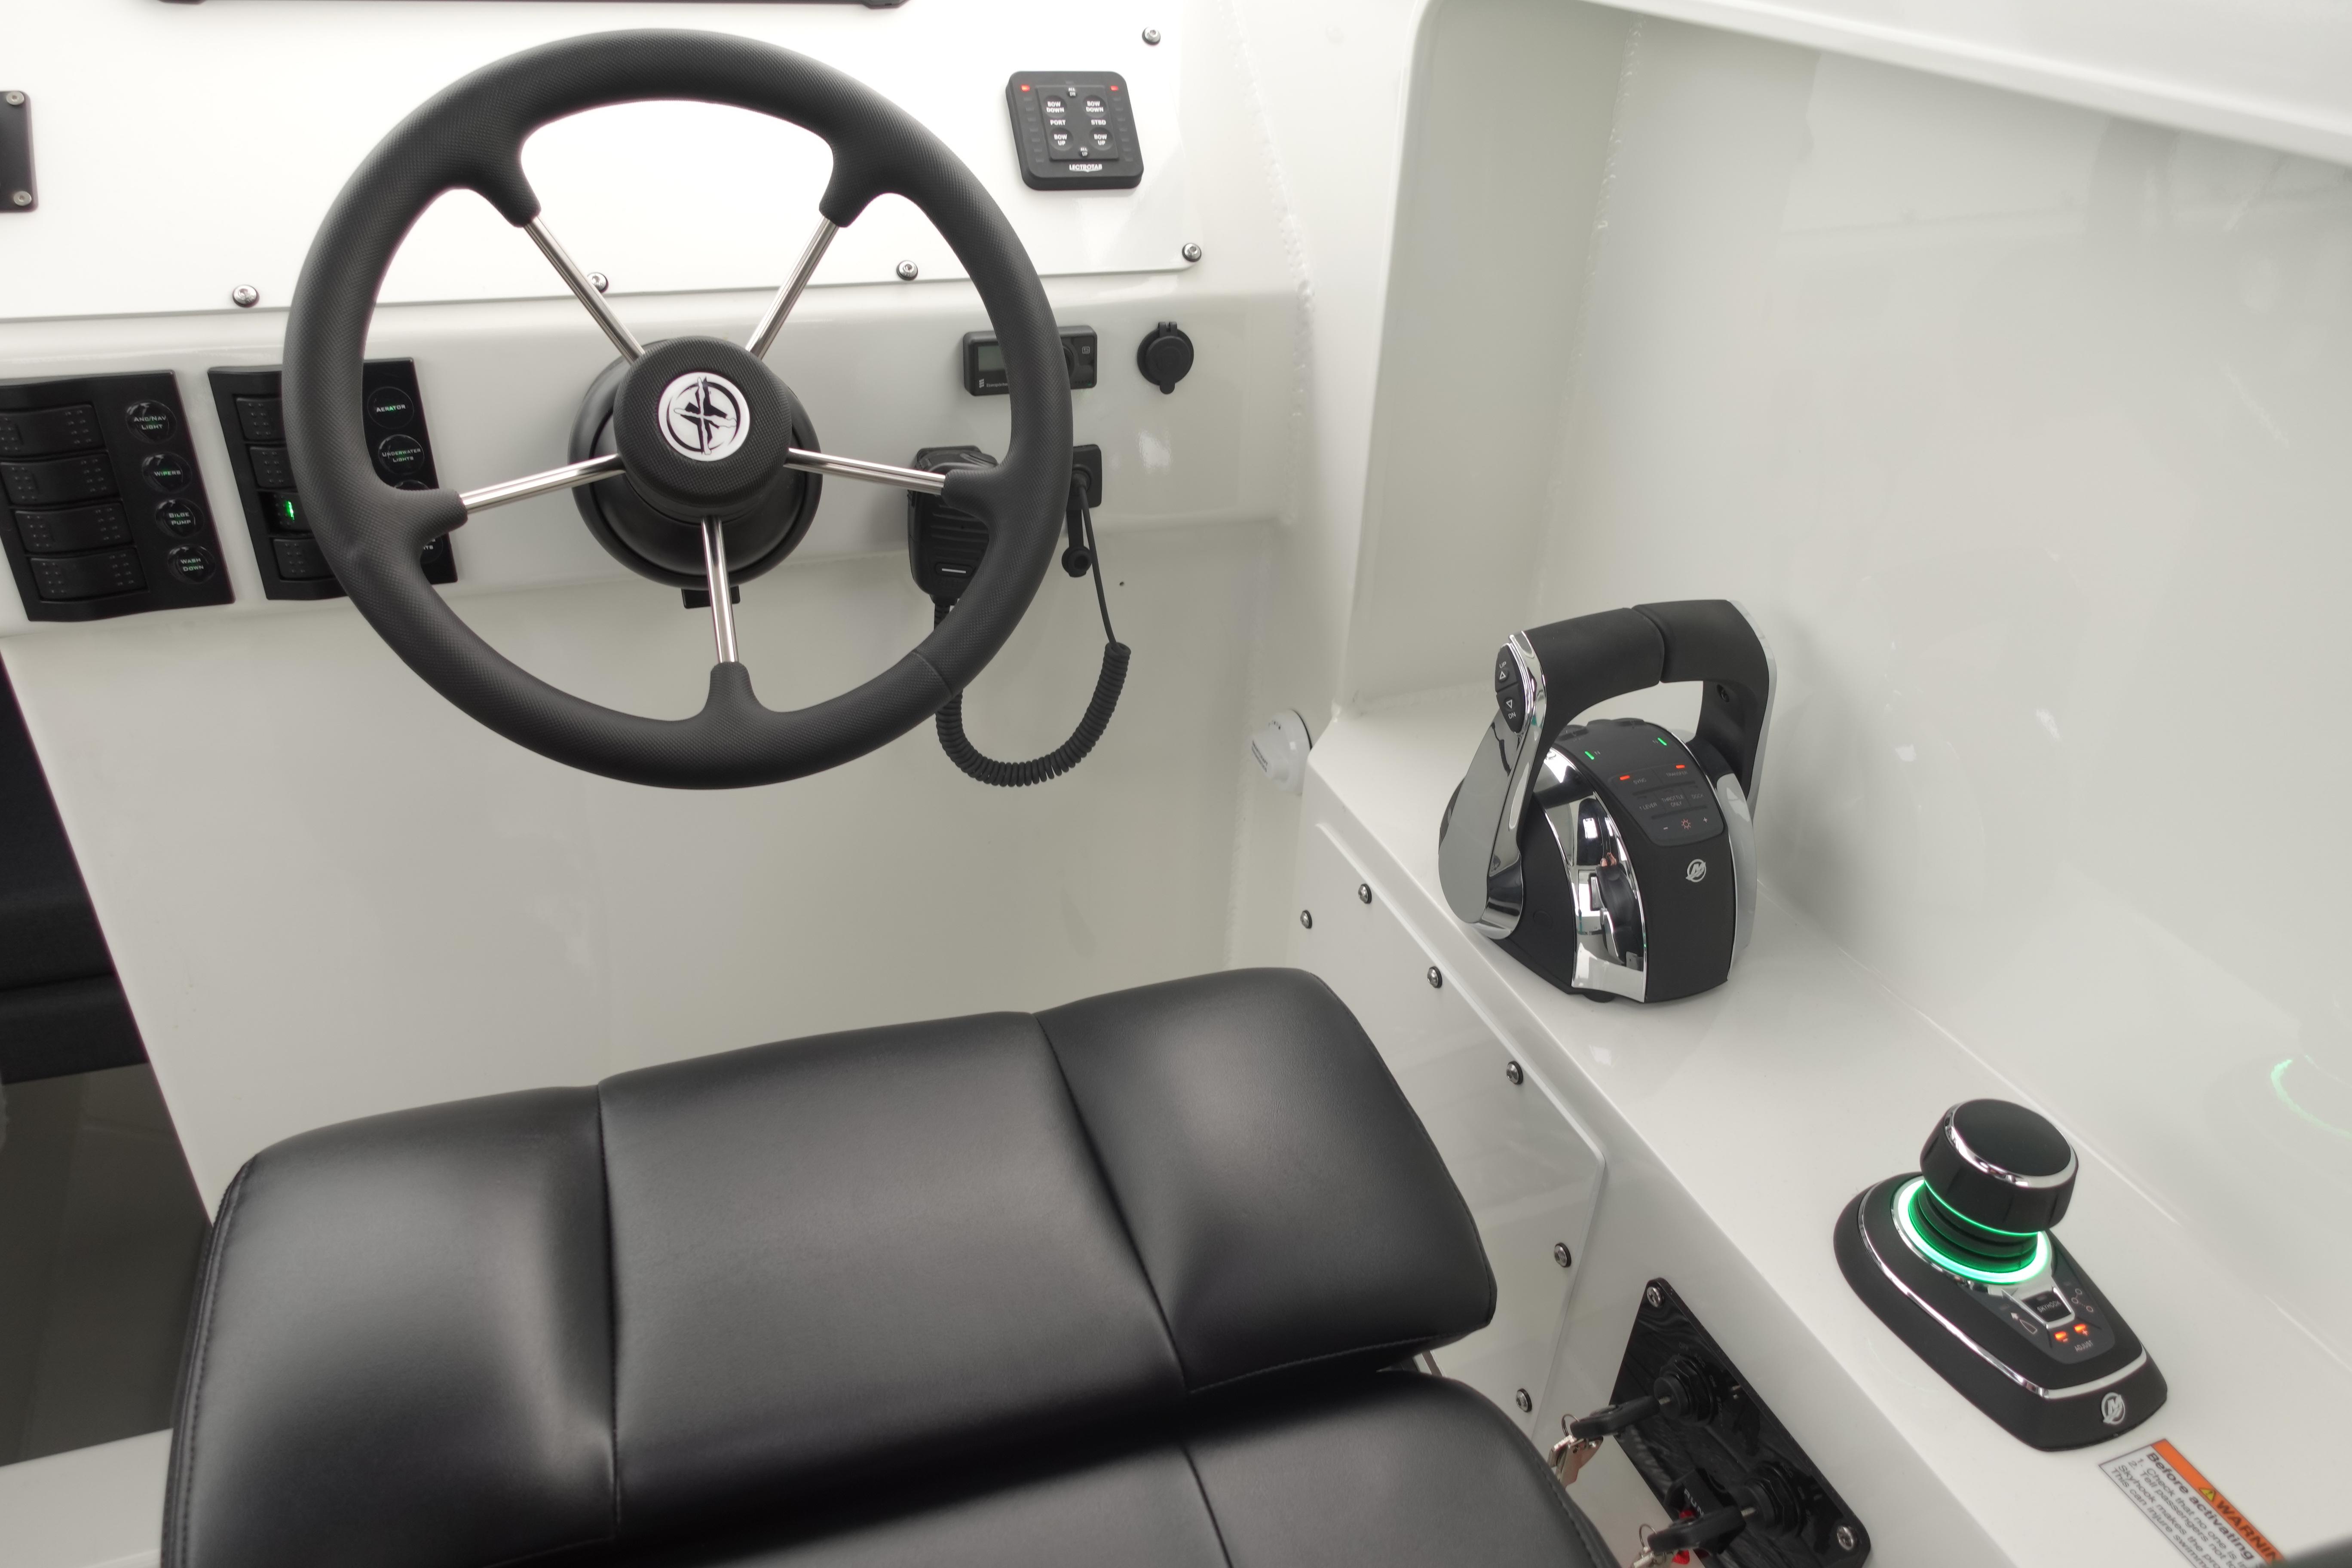 Joystick Controls Throttle and Shifters and Steering Wheel 